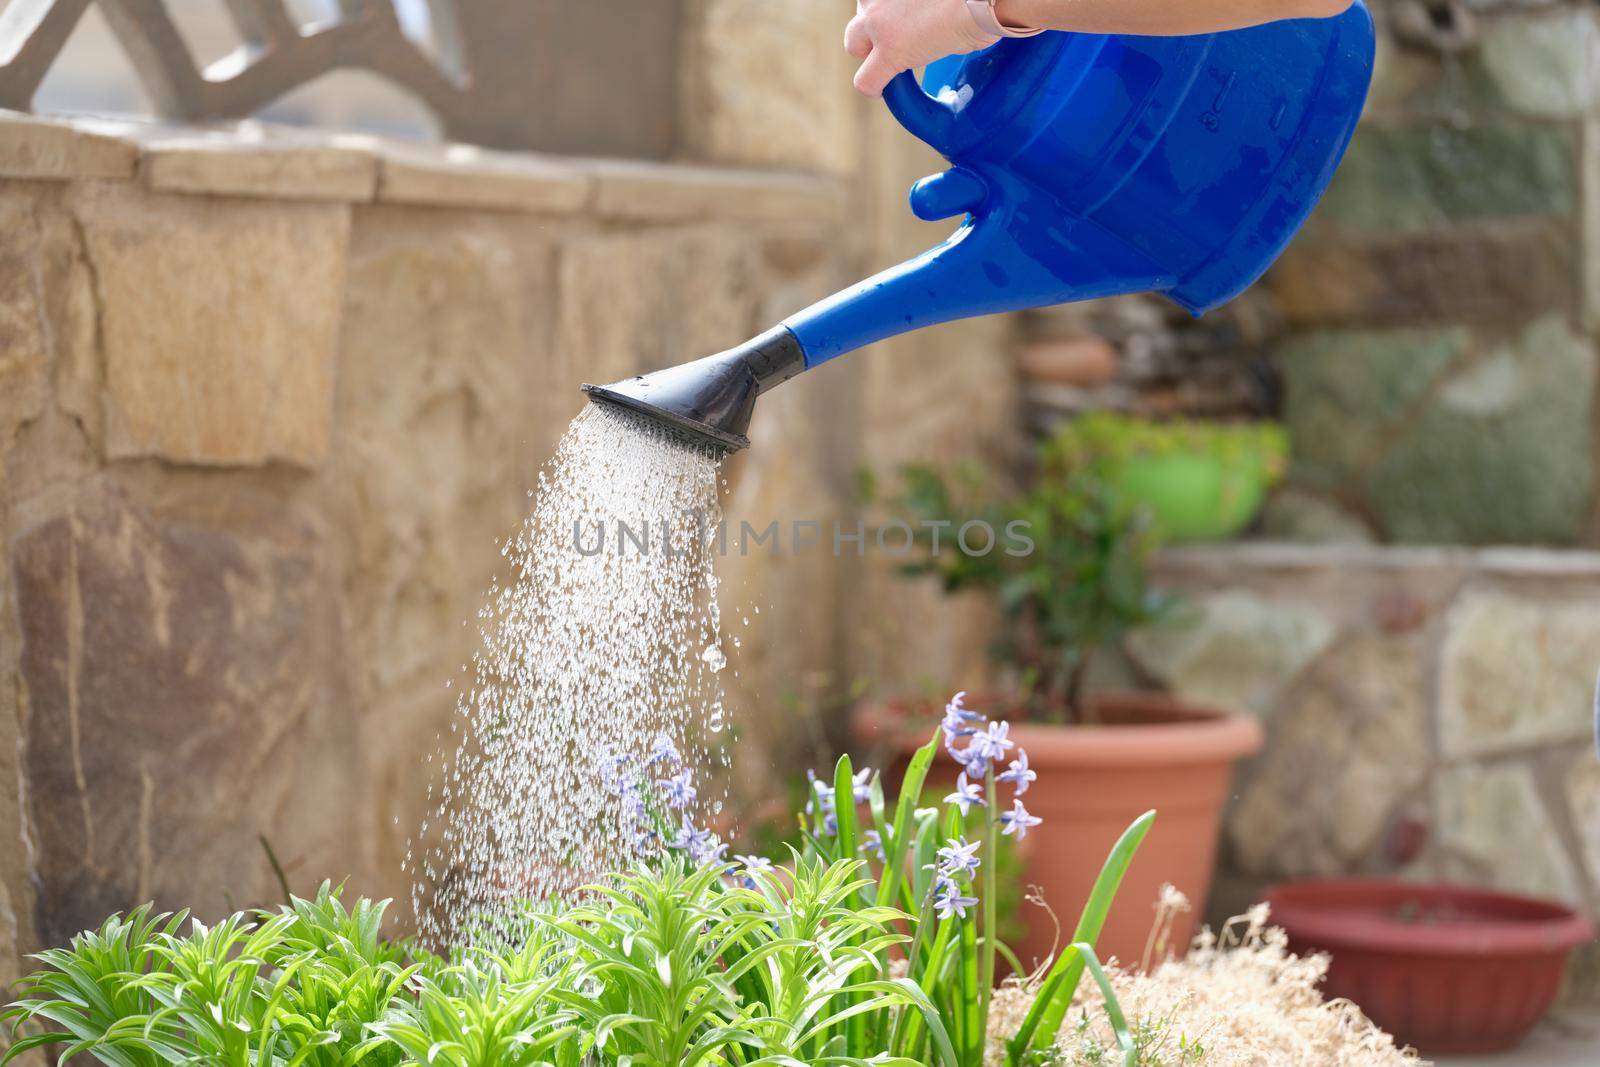 Gardener from watering can waters flower beds in garden yard closeup by kuprevich